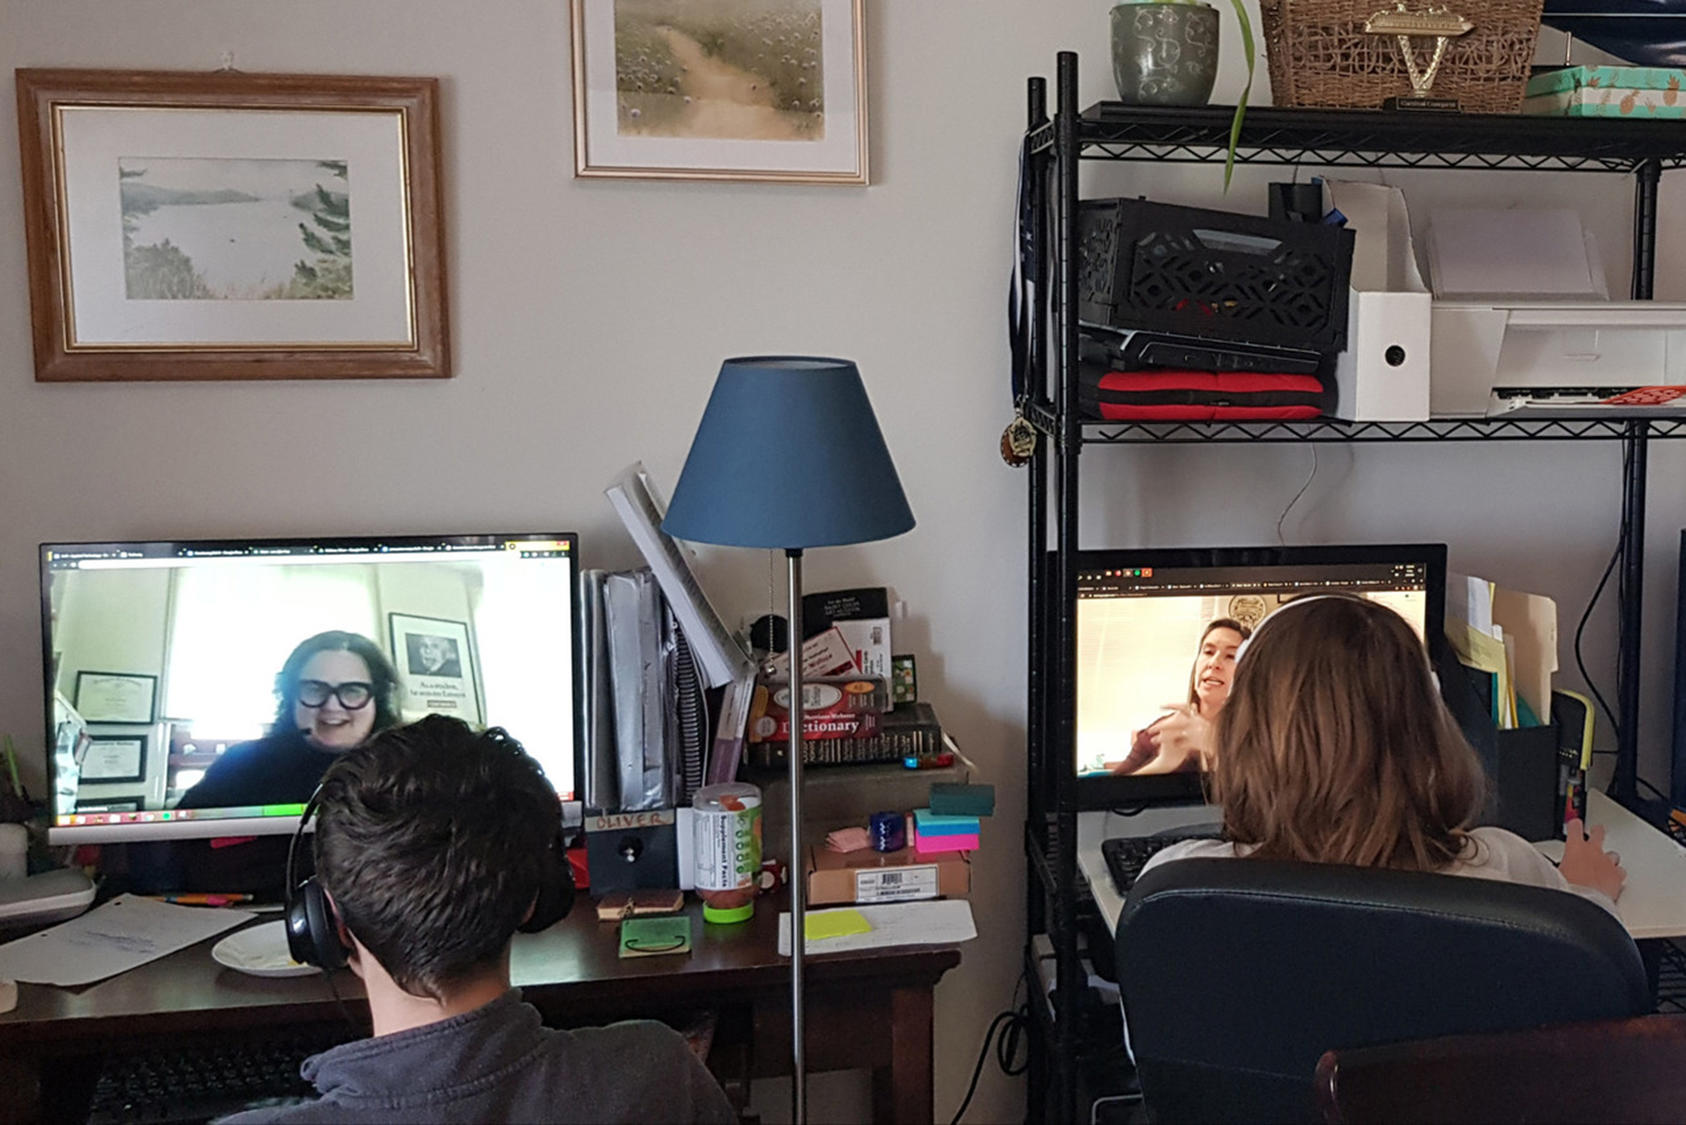 Students participate in distance learning during the pandemic, April 28, 2020. USIP’s Peace Teachers have had to pivot to new forms of teaching like this as social distancing protocols are being observed. (Department of Defense)